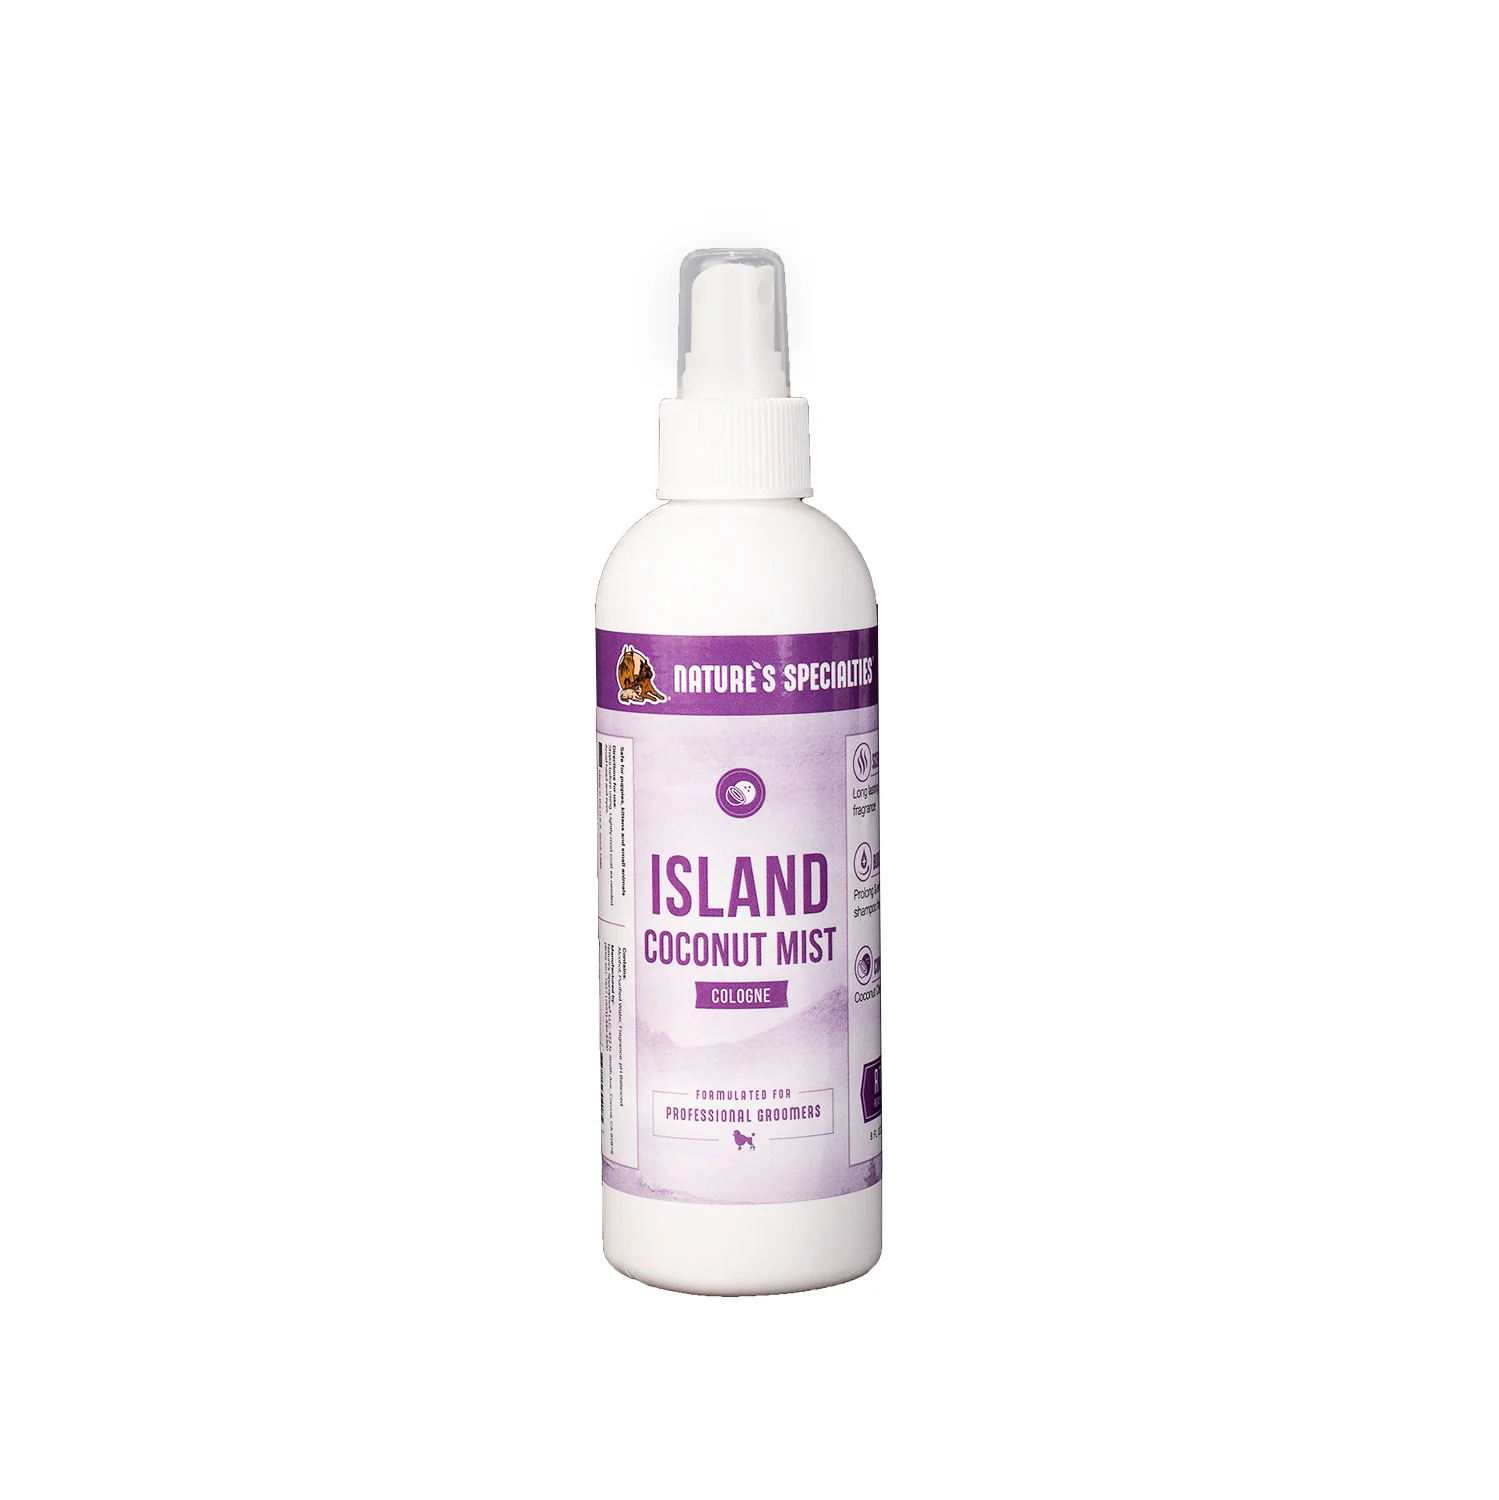 Island Coconut Mist Cologne